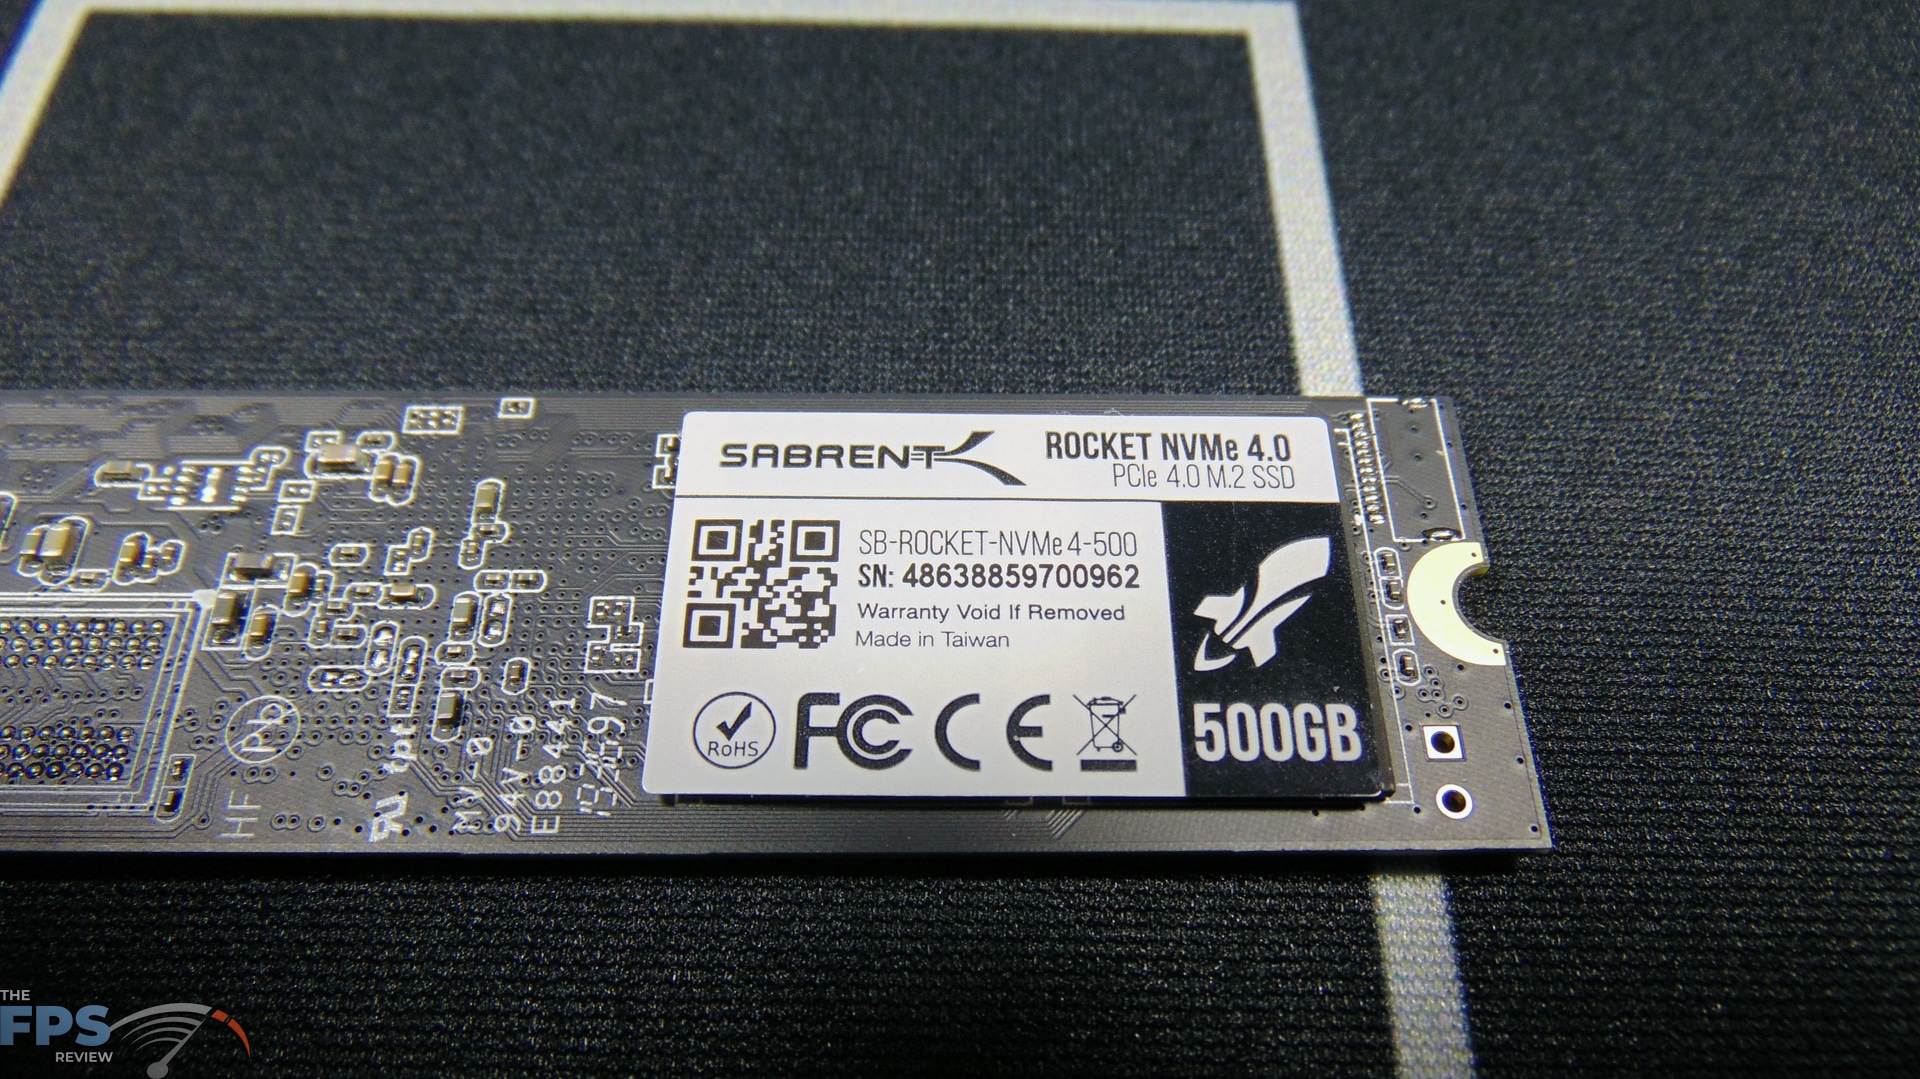 Sabrent Rocket 500GB PCIe 4.0 NVMe SSD Review - The FPS Review